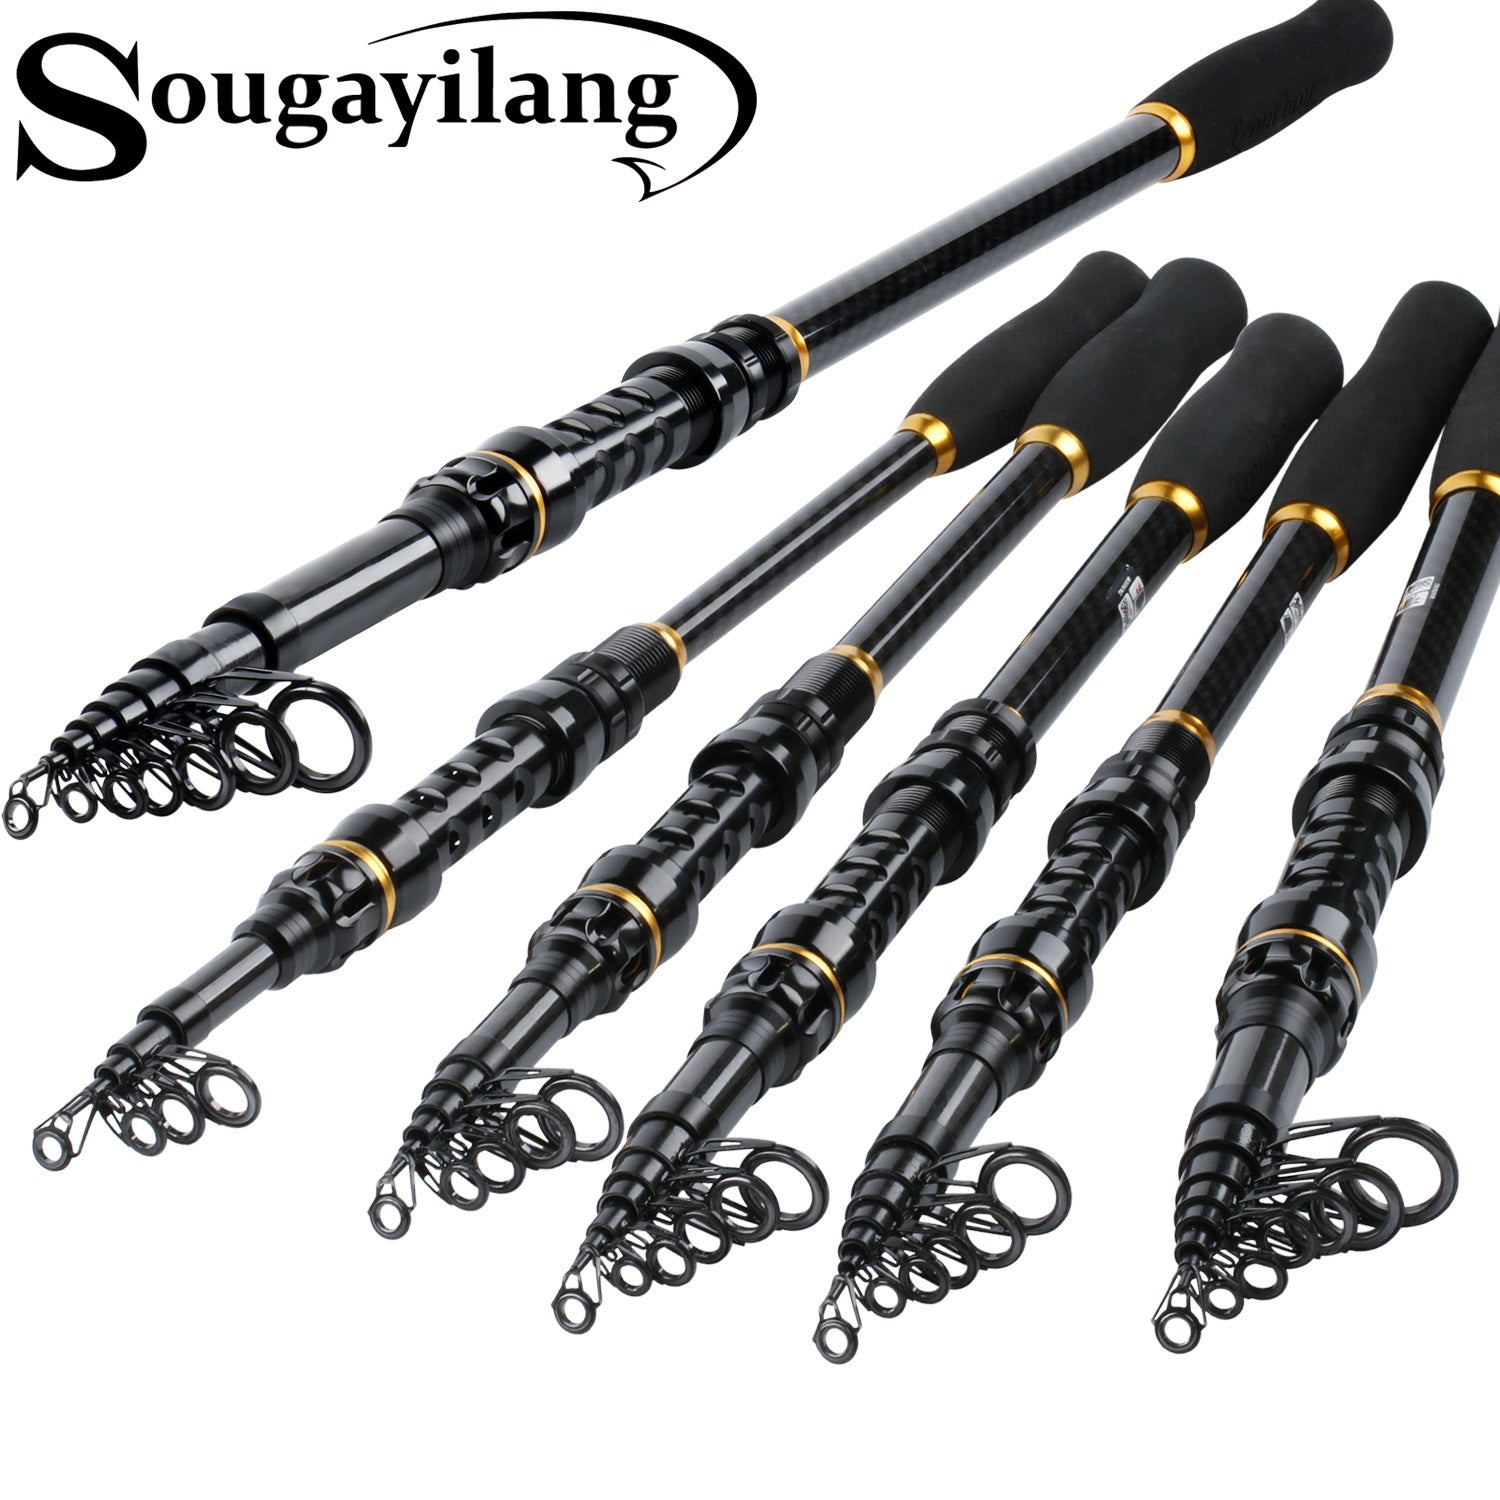 TROUTBOY carbon fiber telescopic rod, suitable for outdoor travel and  freshwater fishing